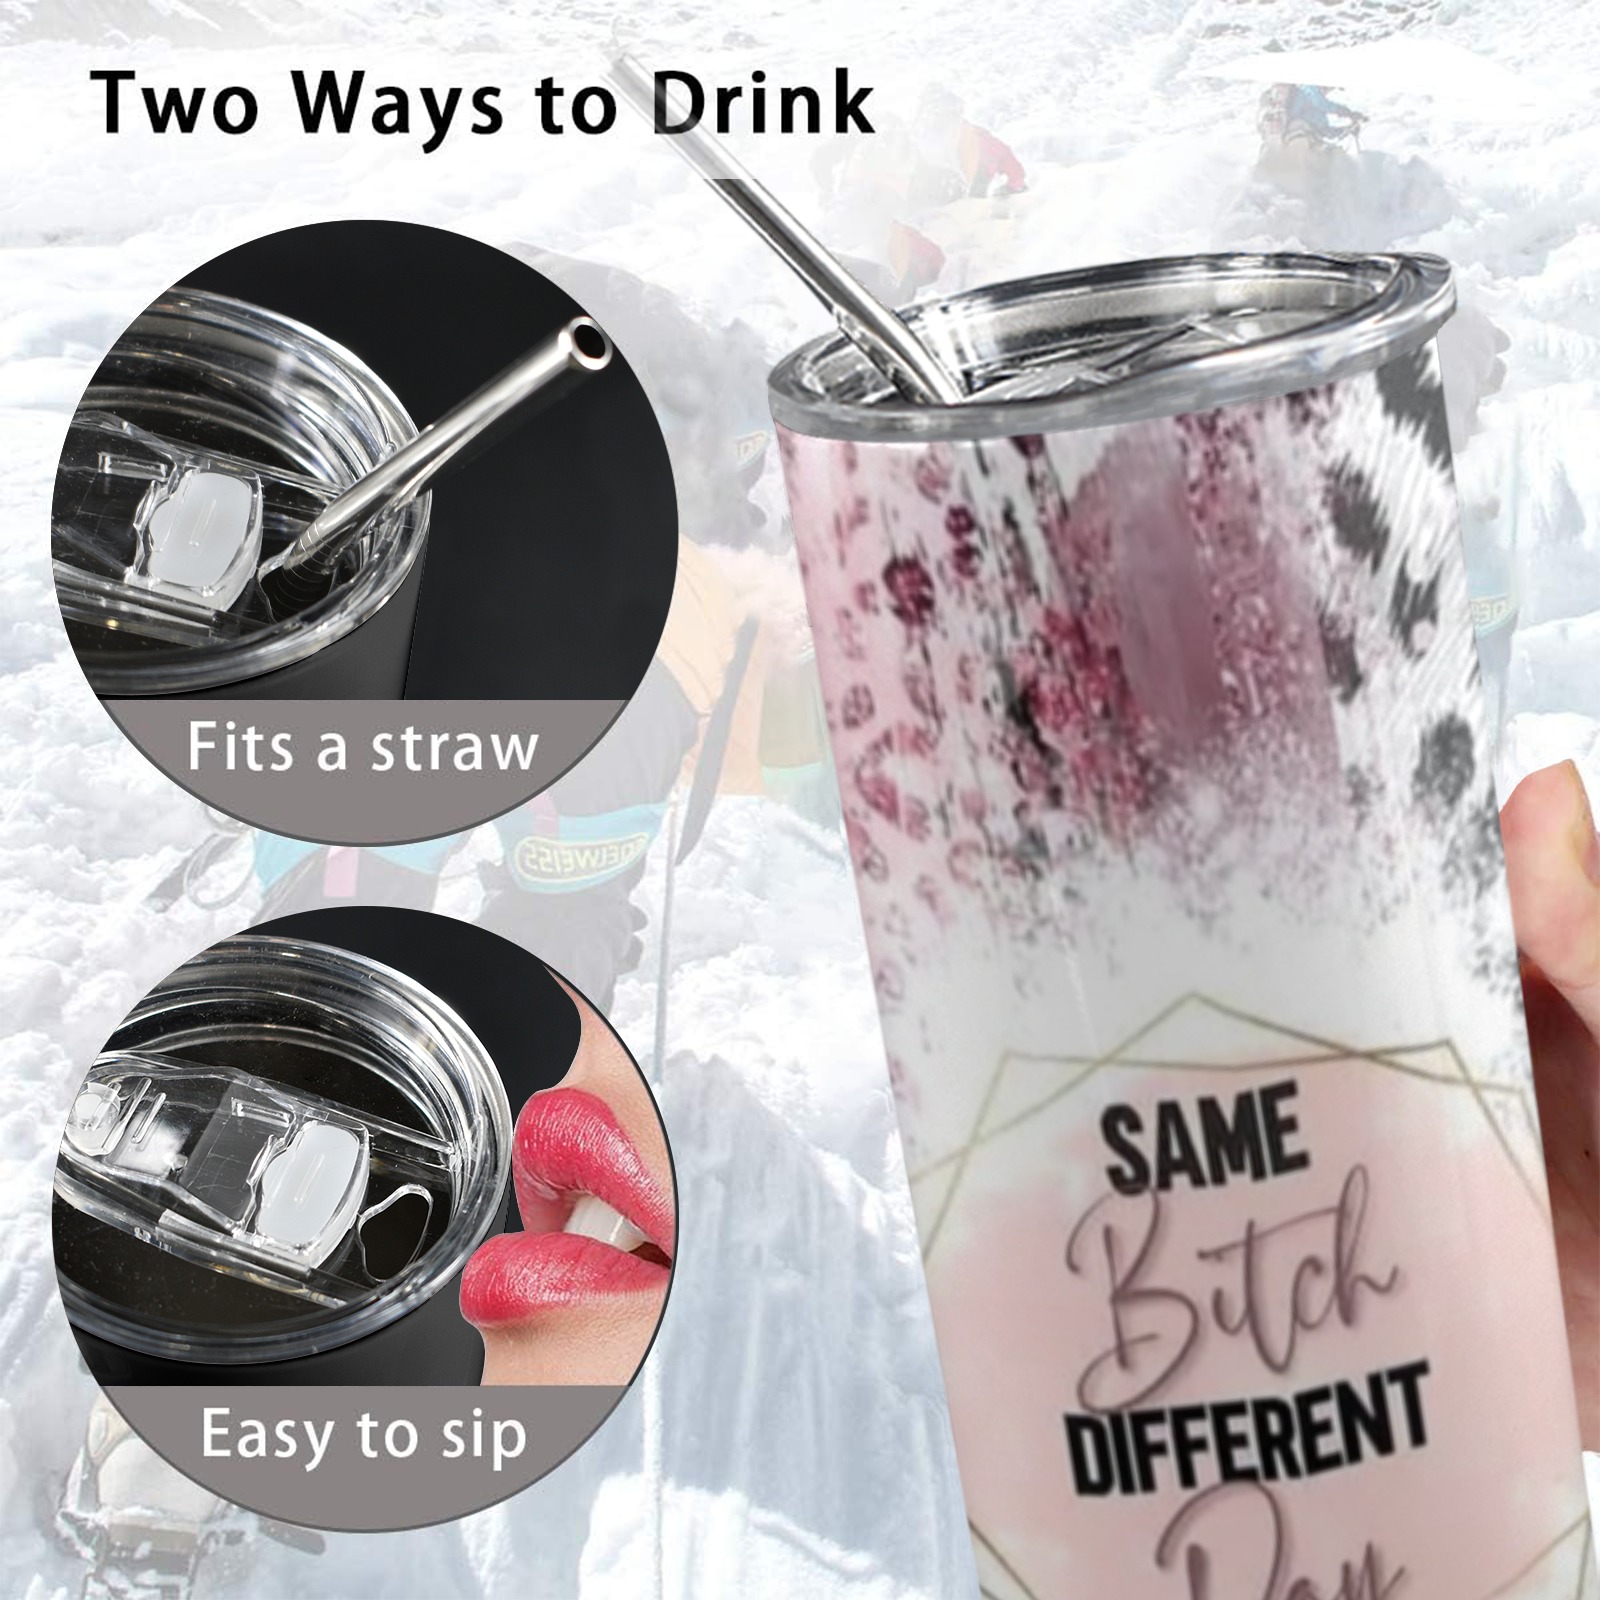 Same Bitch, Different Day - 20oz Tall Skinny Tumbler with Lid and Straw